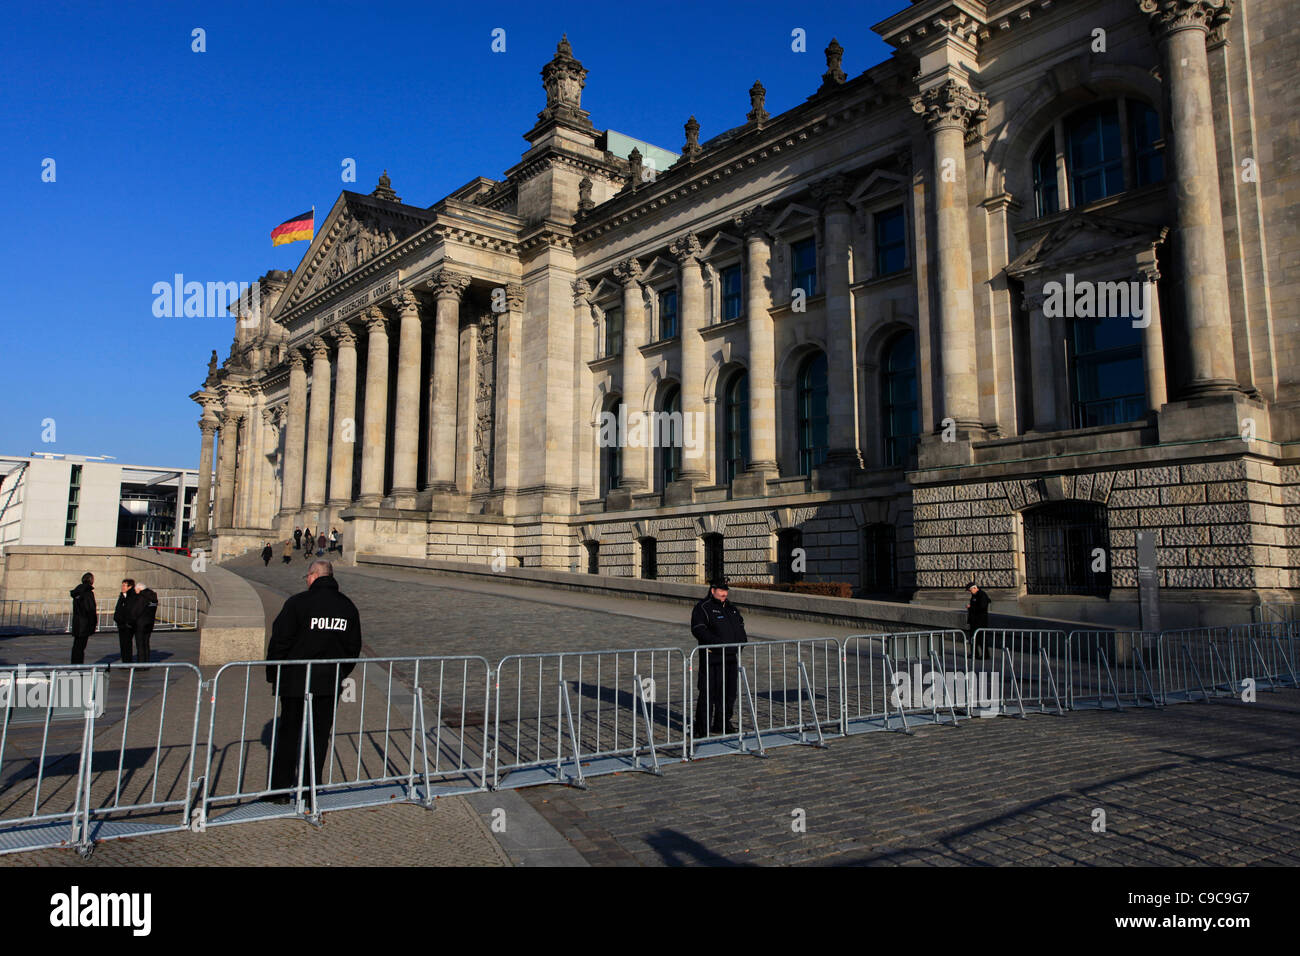 Policemen stand guard in front of the German Federal parliament Reichstag building seat of the Bundestag built in the neo-renaissance style in Berlin Germany Stock Photo